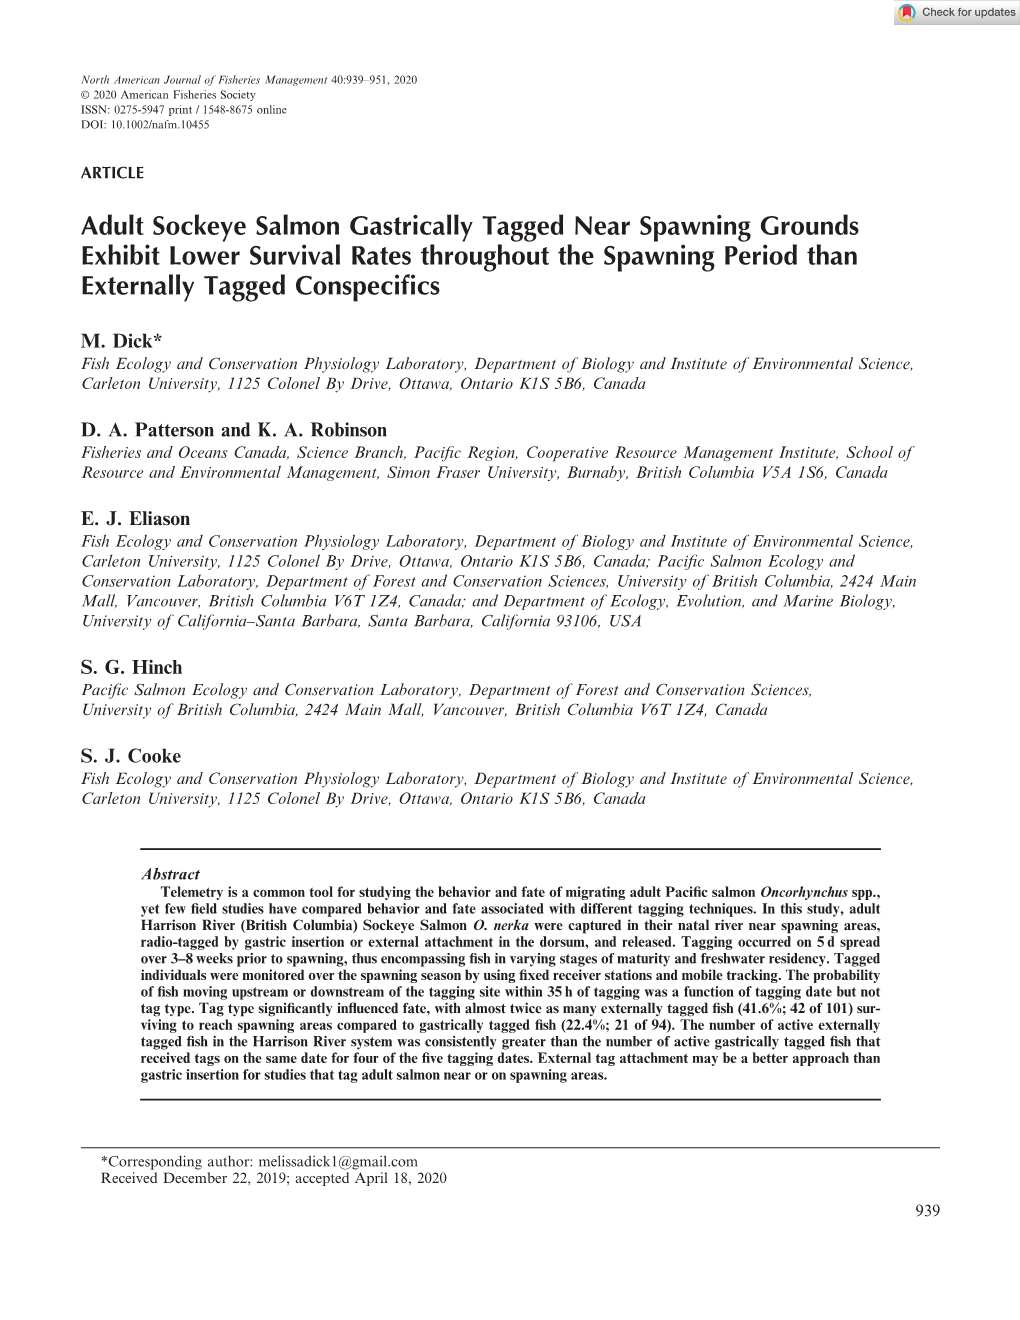 Adult Sockeye Salmon Gastrically Tagged Near Spawning Grounds Exhibit Lower Survival Rates Throughout the Spawning Period Than Externally Tagged Conspeciﬁcs